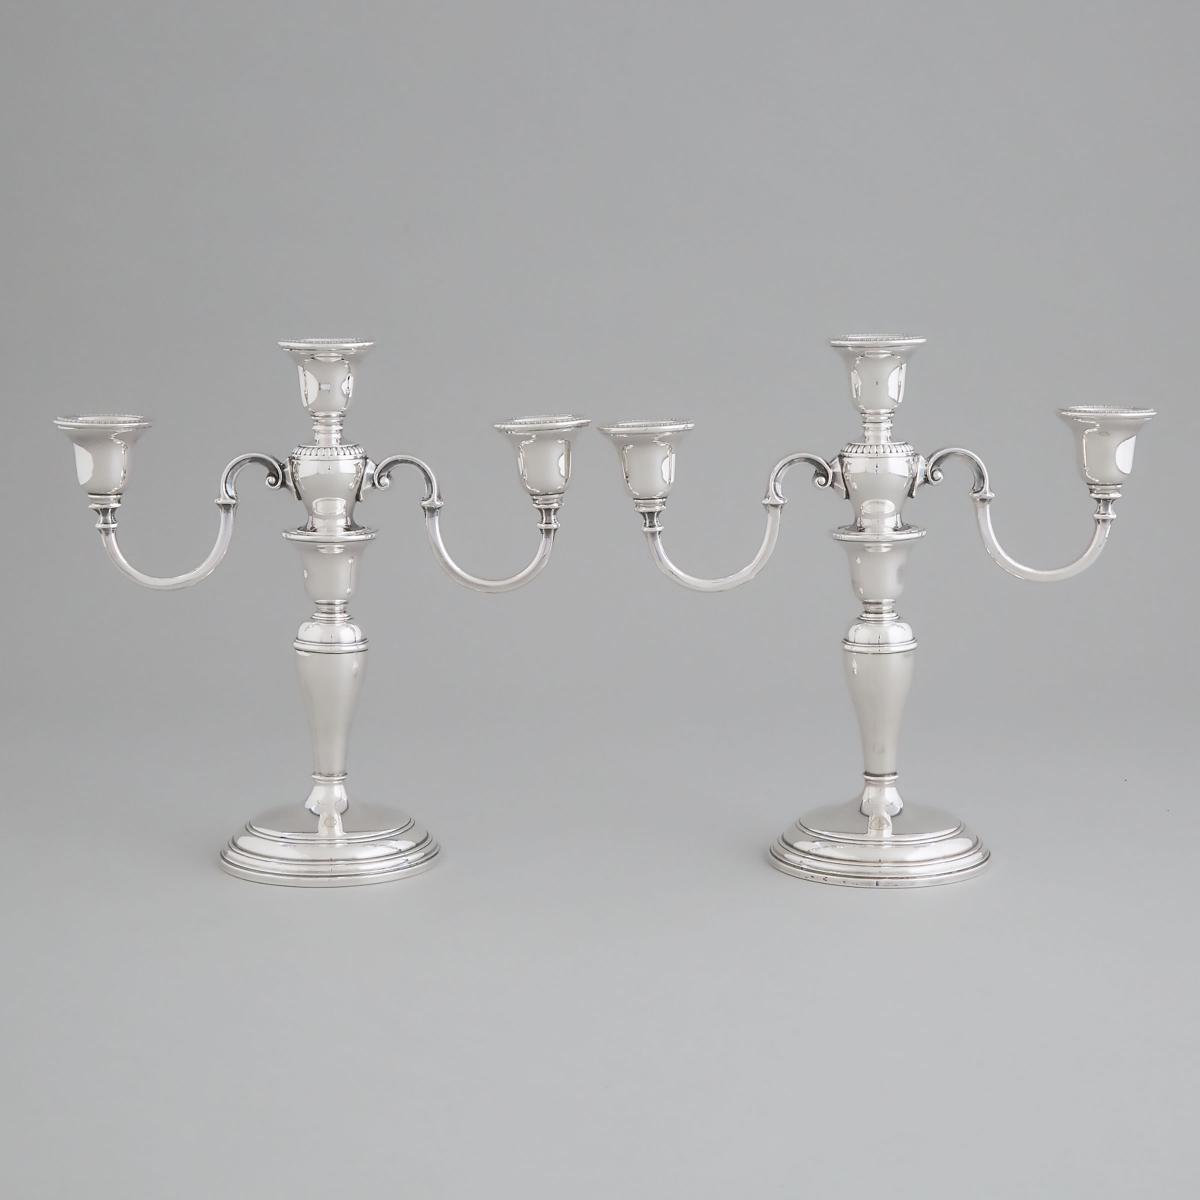 Pair of Canadian Silver Three-Light Candelabra, Henry Birks & Sons, Montreal, Que., 1971, height 10.